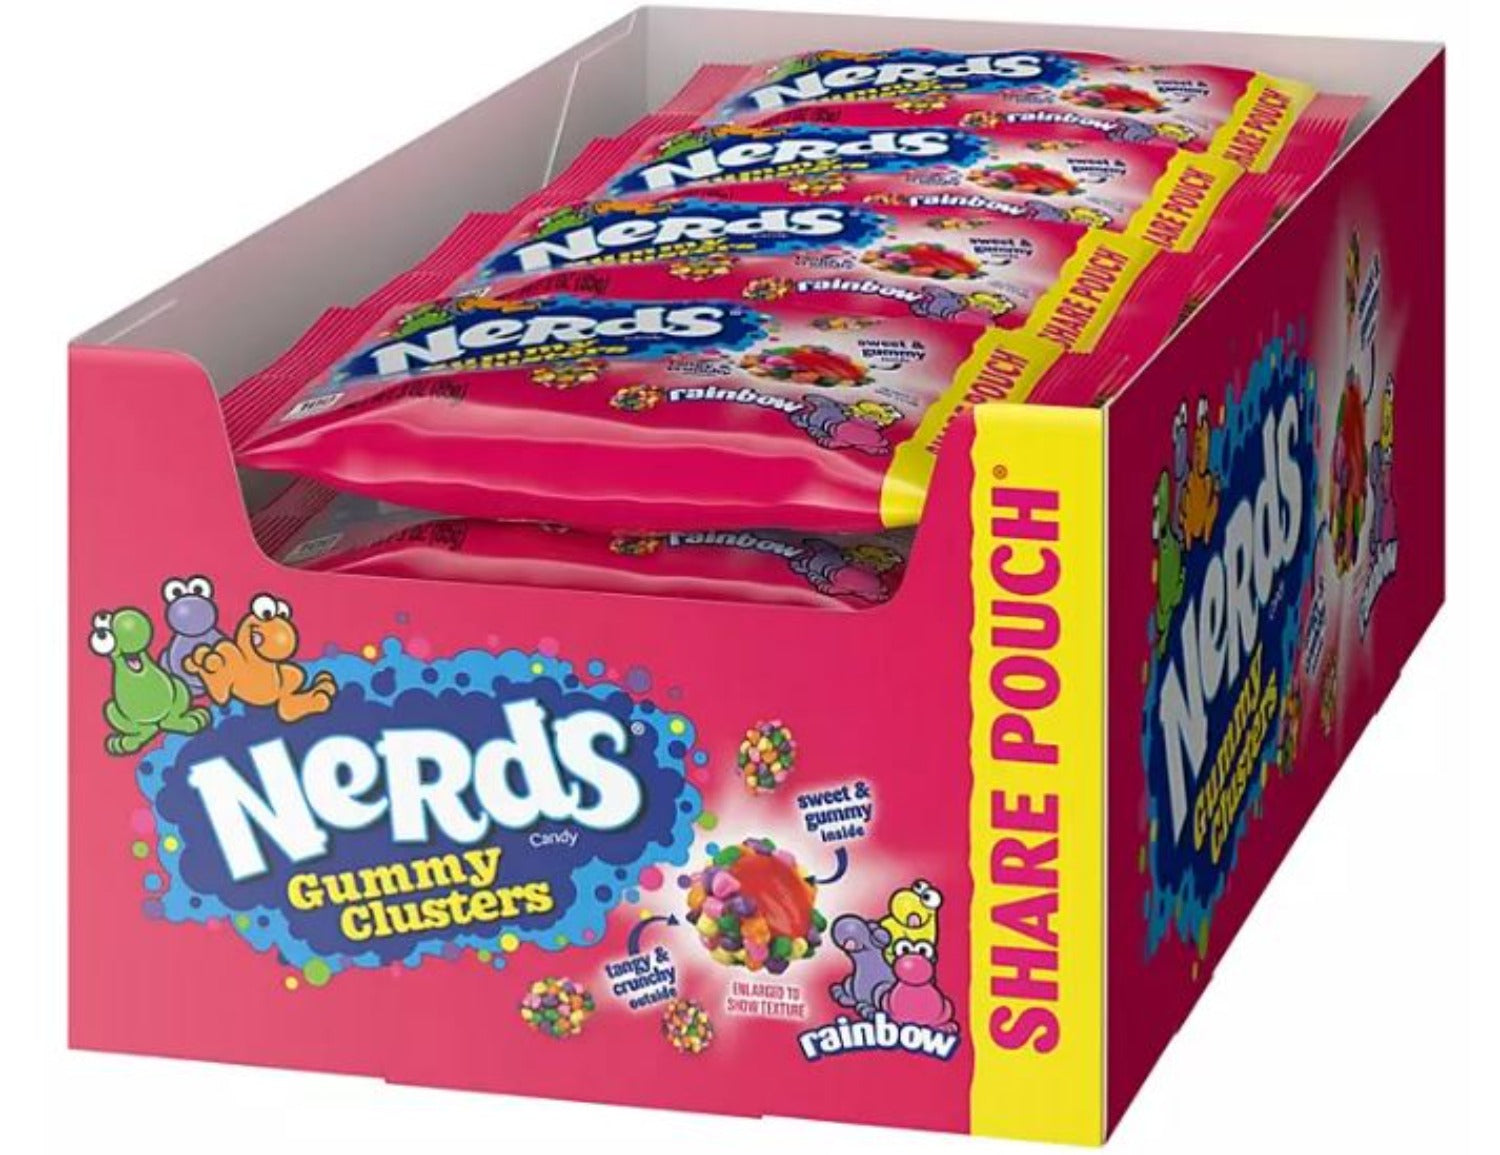 Nerds Gummy Clusters Candy - 3 oz. -12 ct.